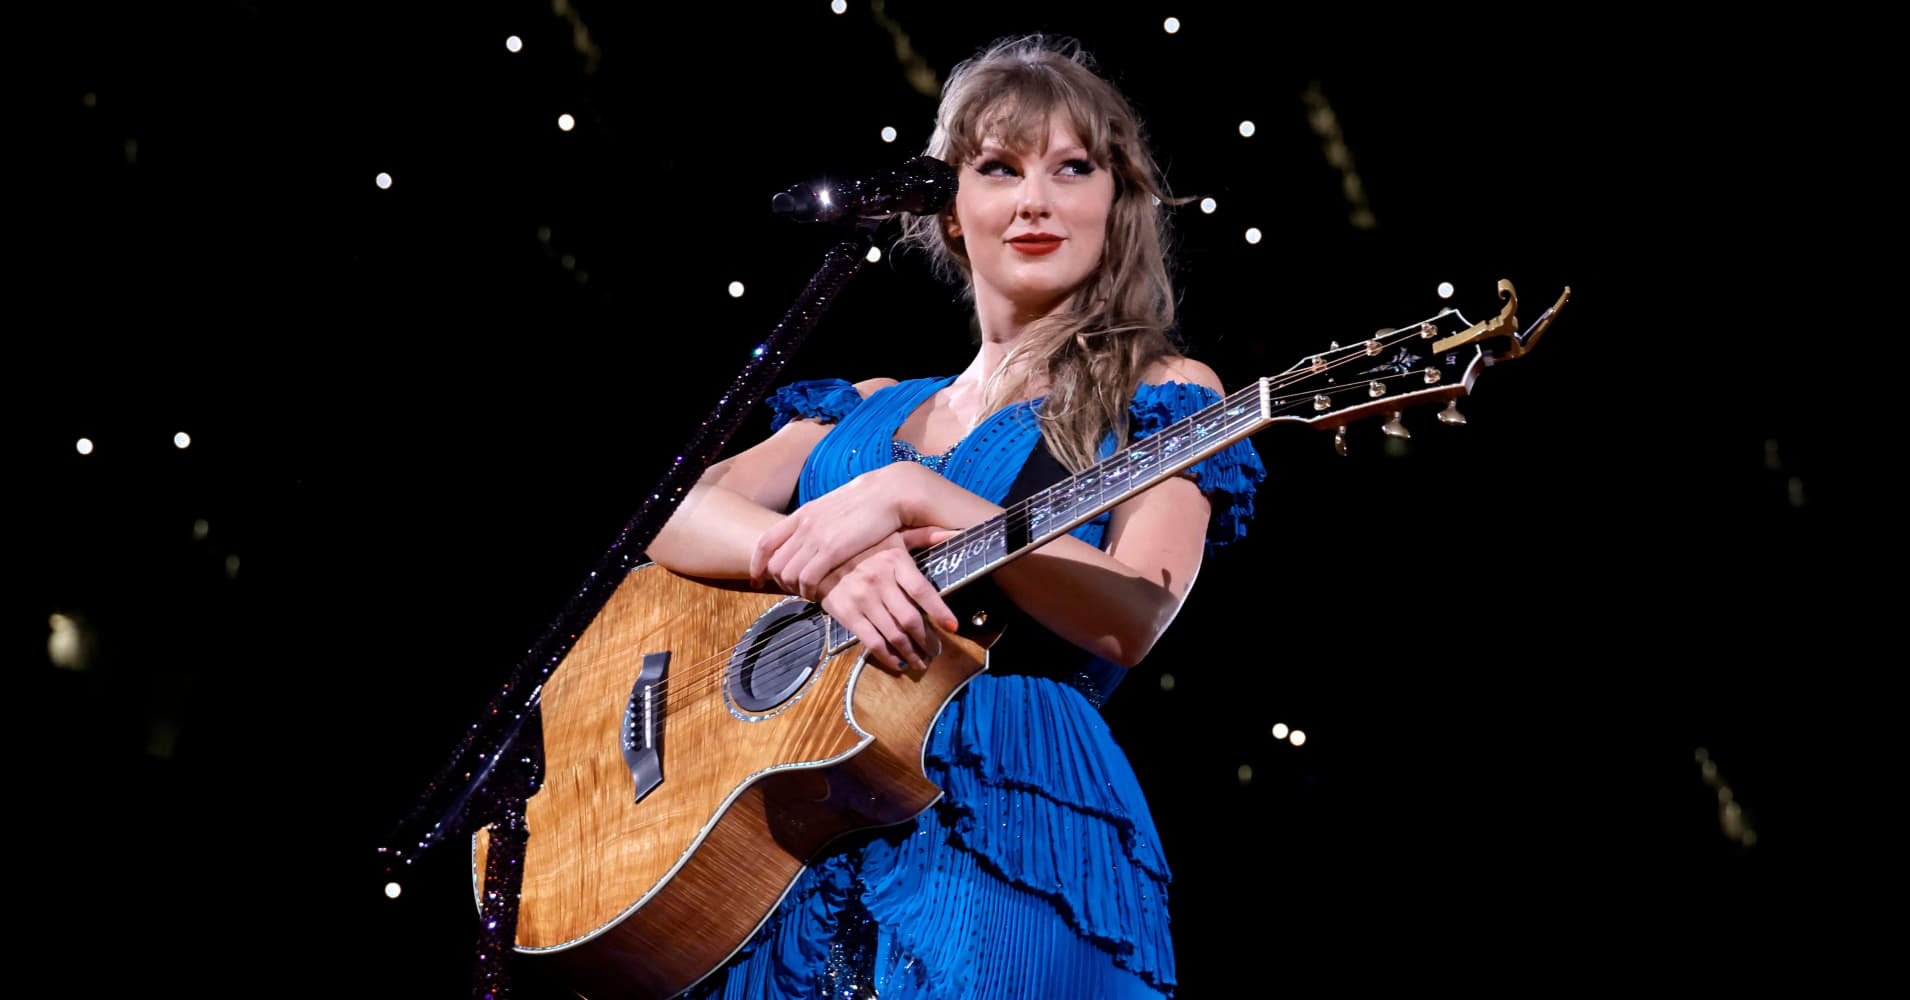 amazon, taylor swift’s ‘eras tour’ concert film will be available to stream. here’s when and where